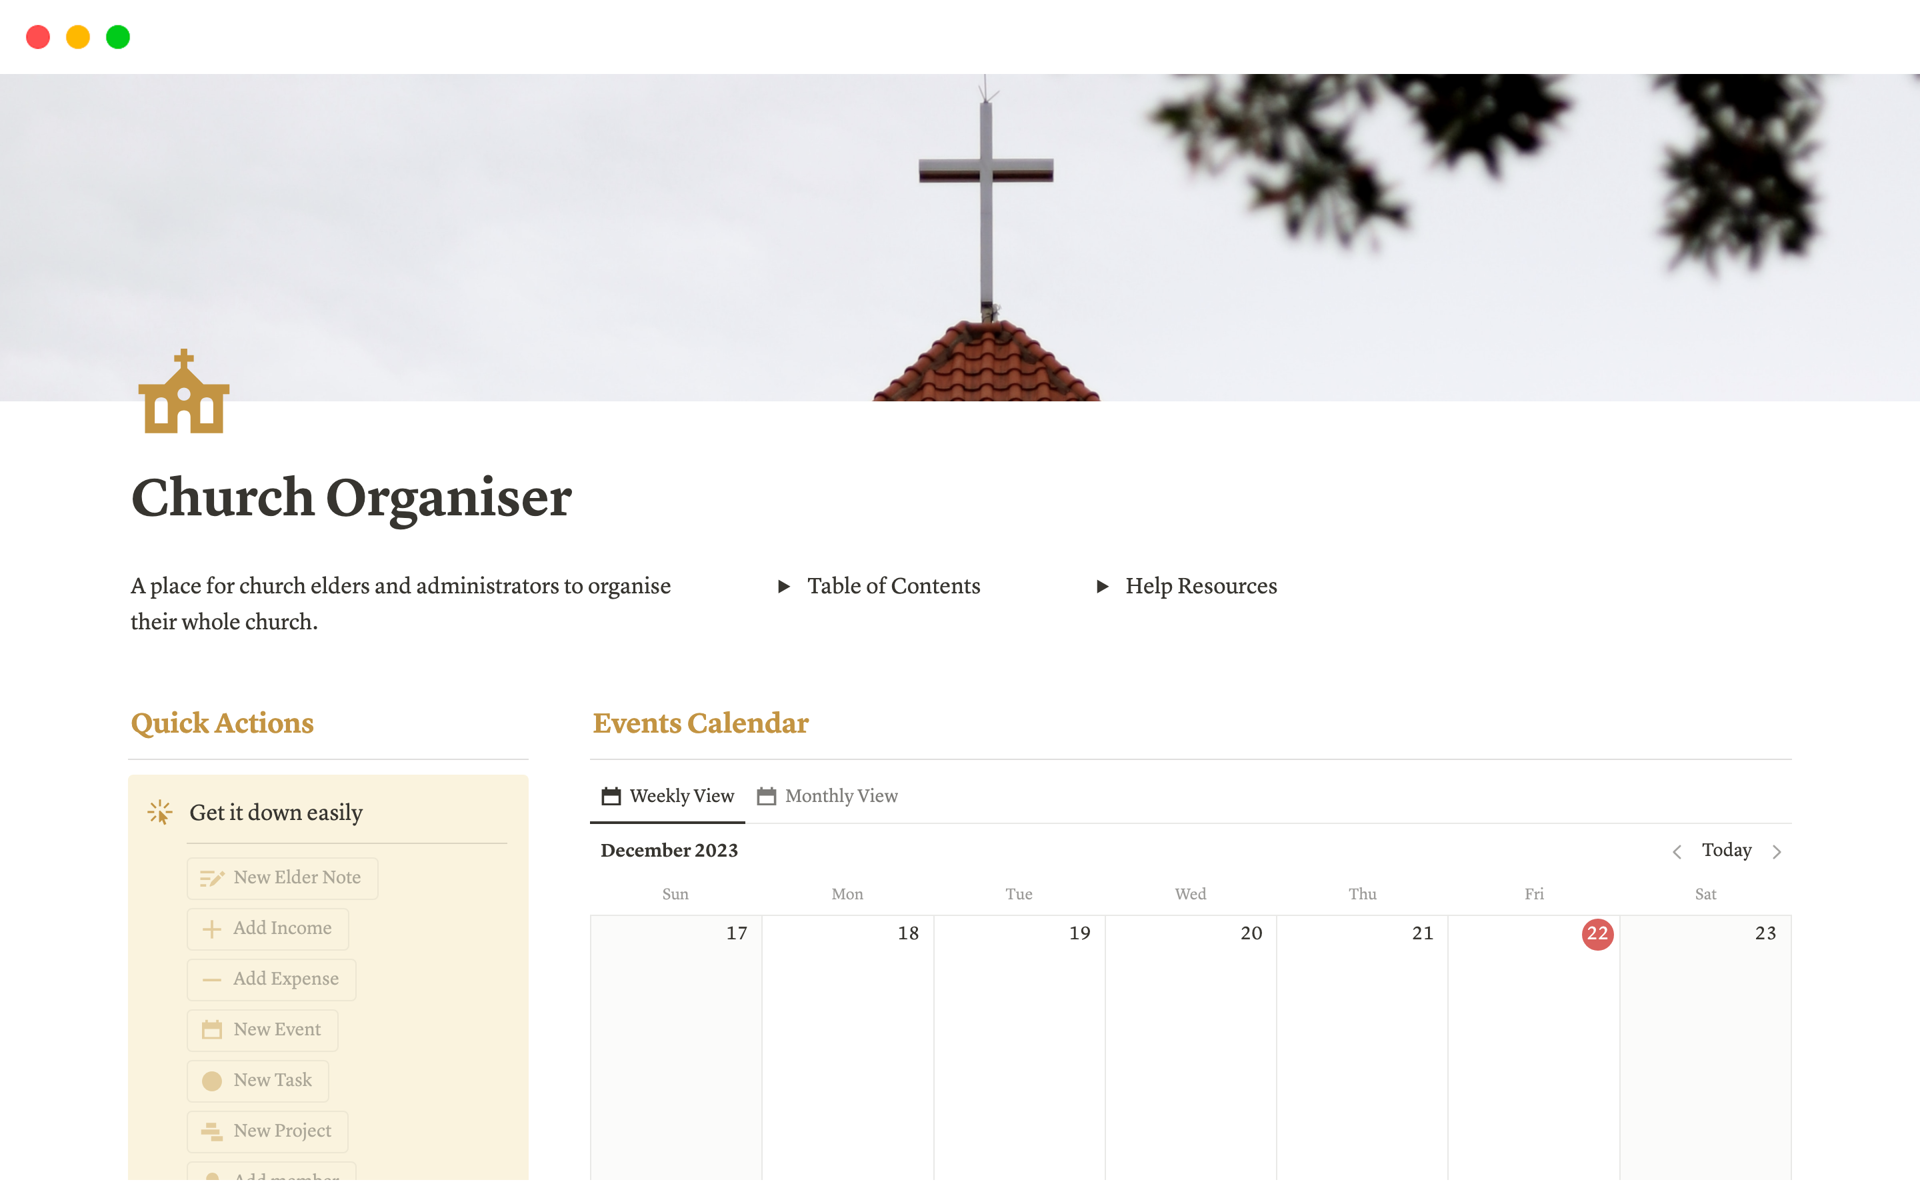 Manage your whole church in one template!